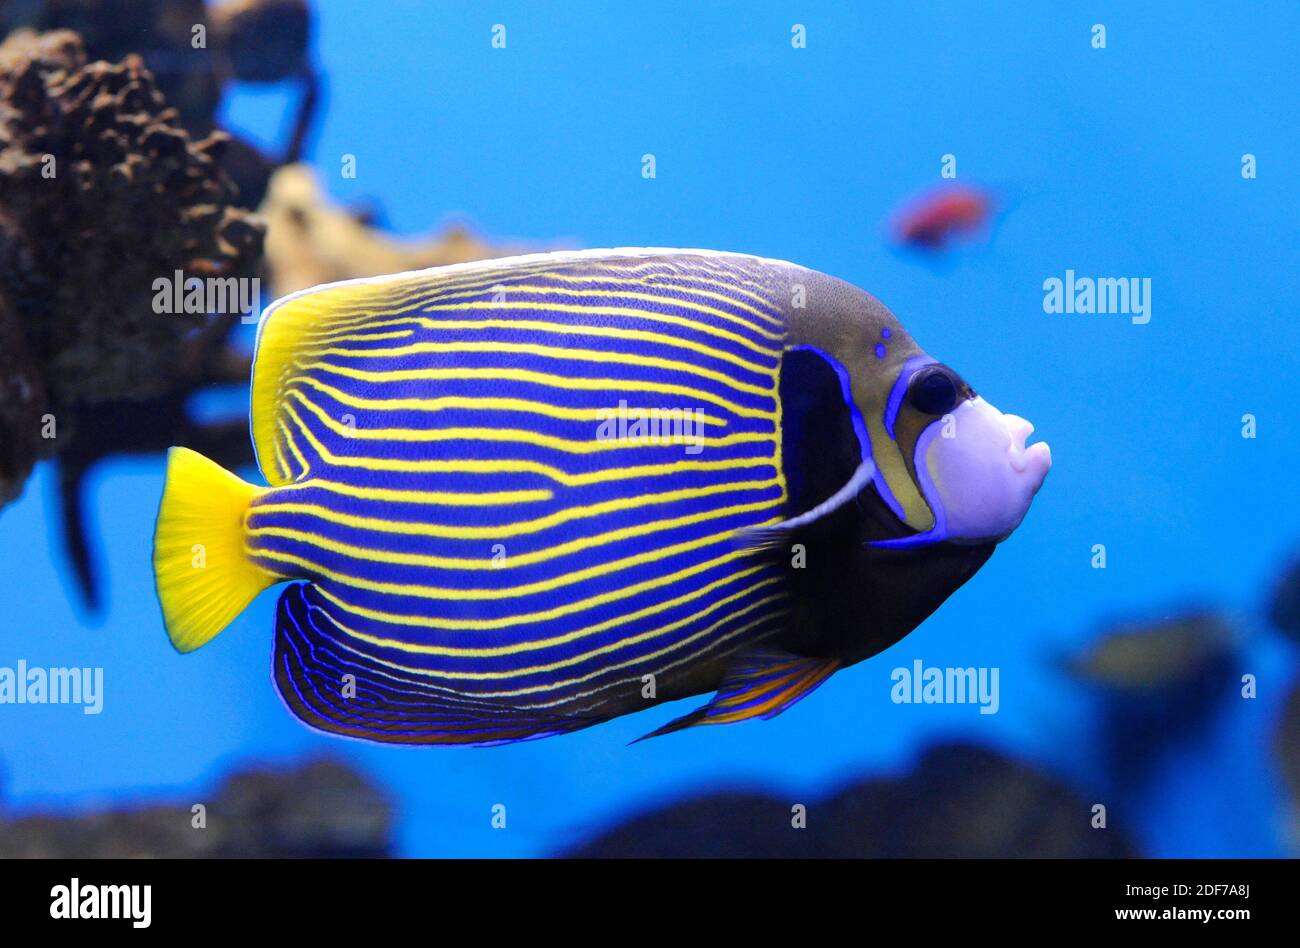 Emperor angelfish (Pomacanthus imperator) is a marine fish native to Indo-Pacific Ocean. Stock Photo